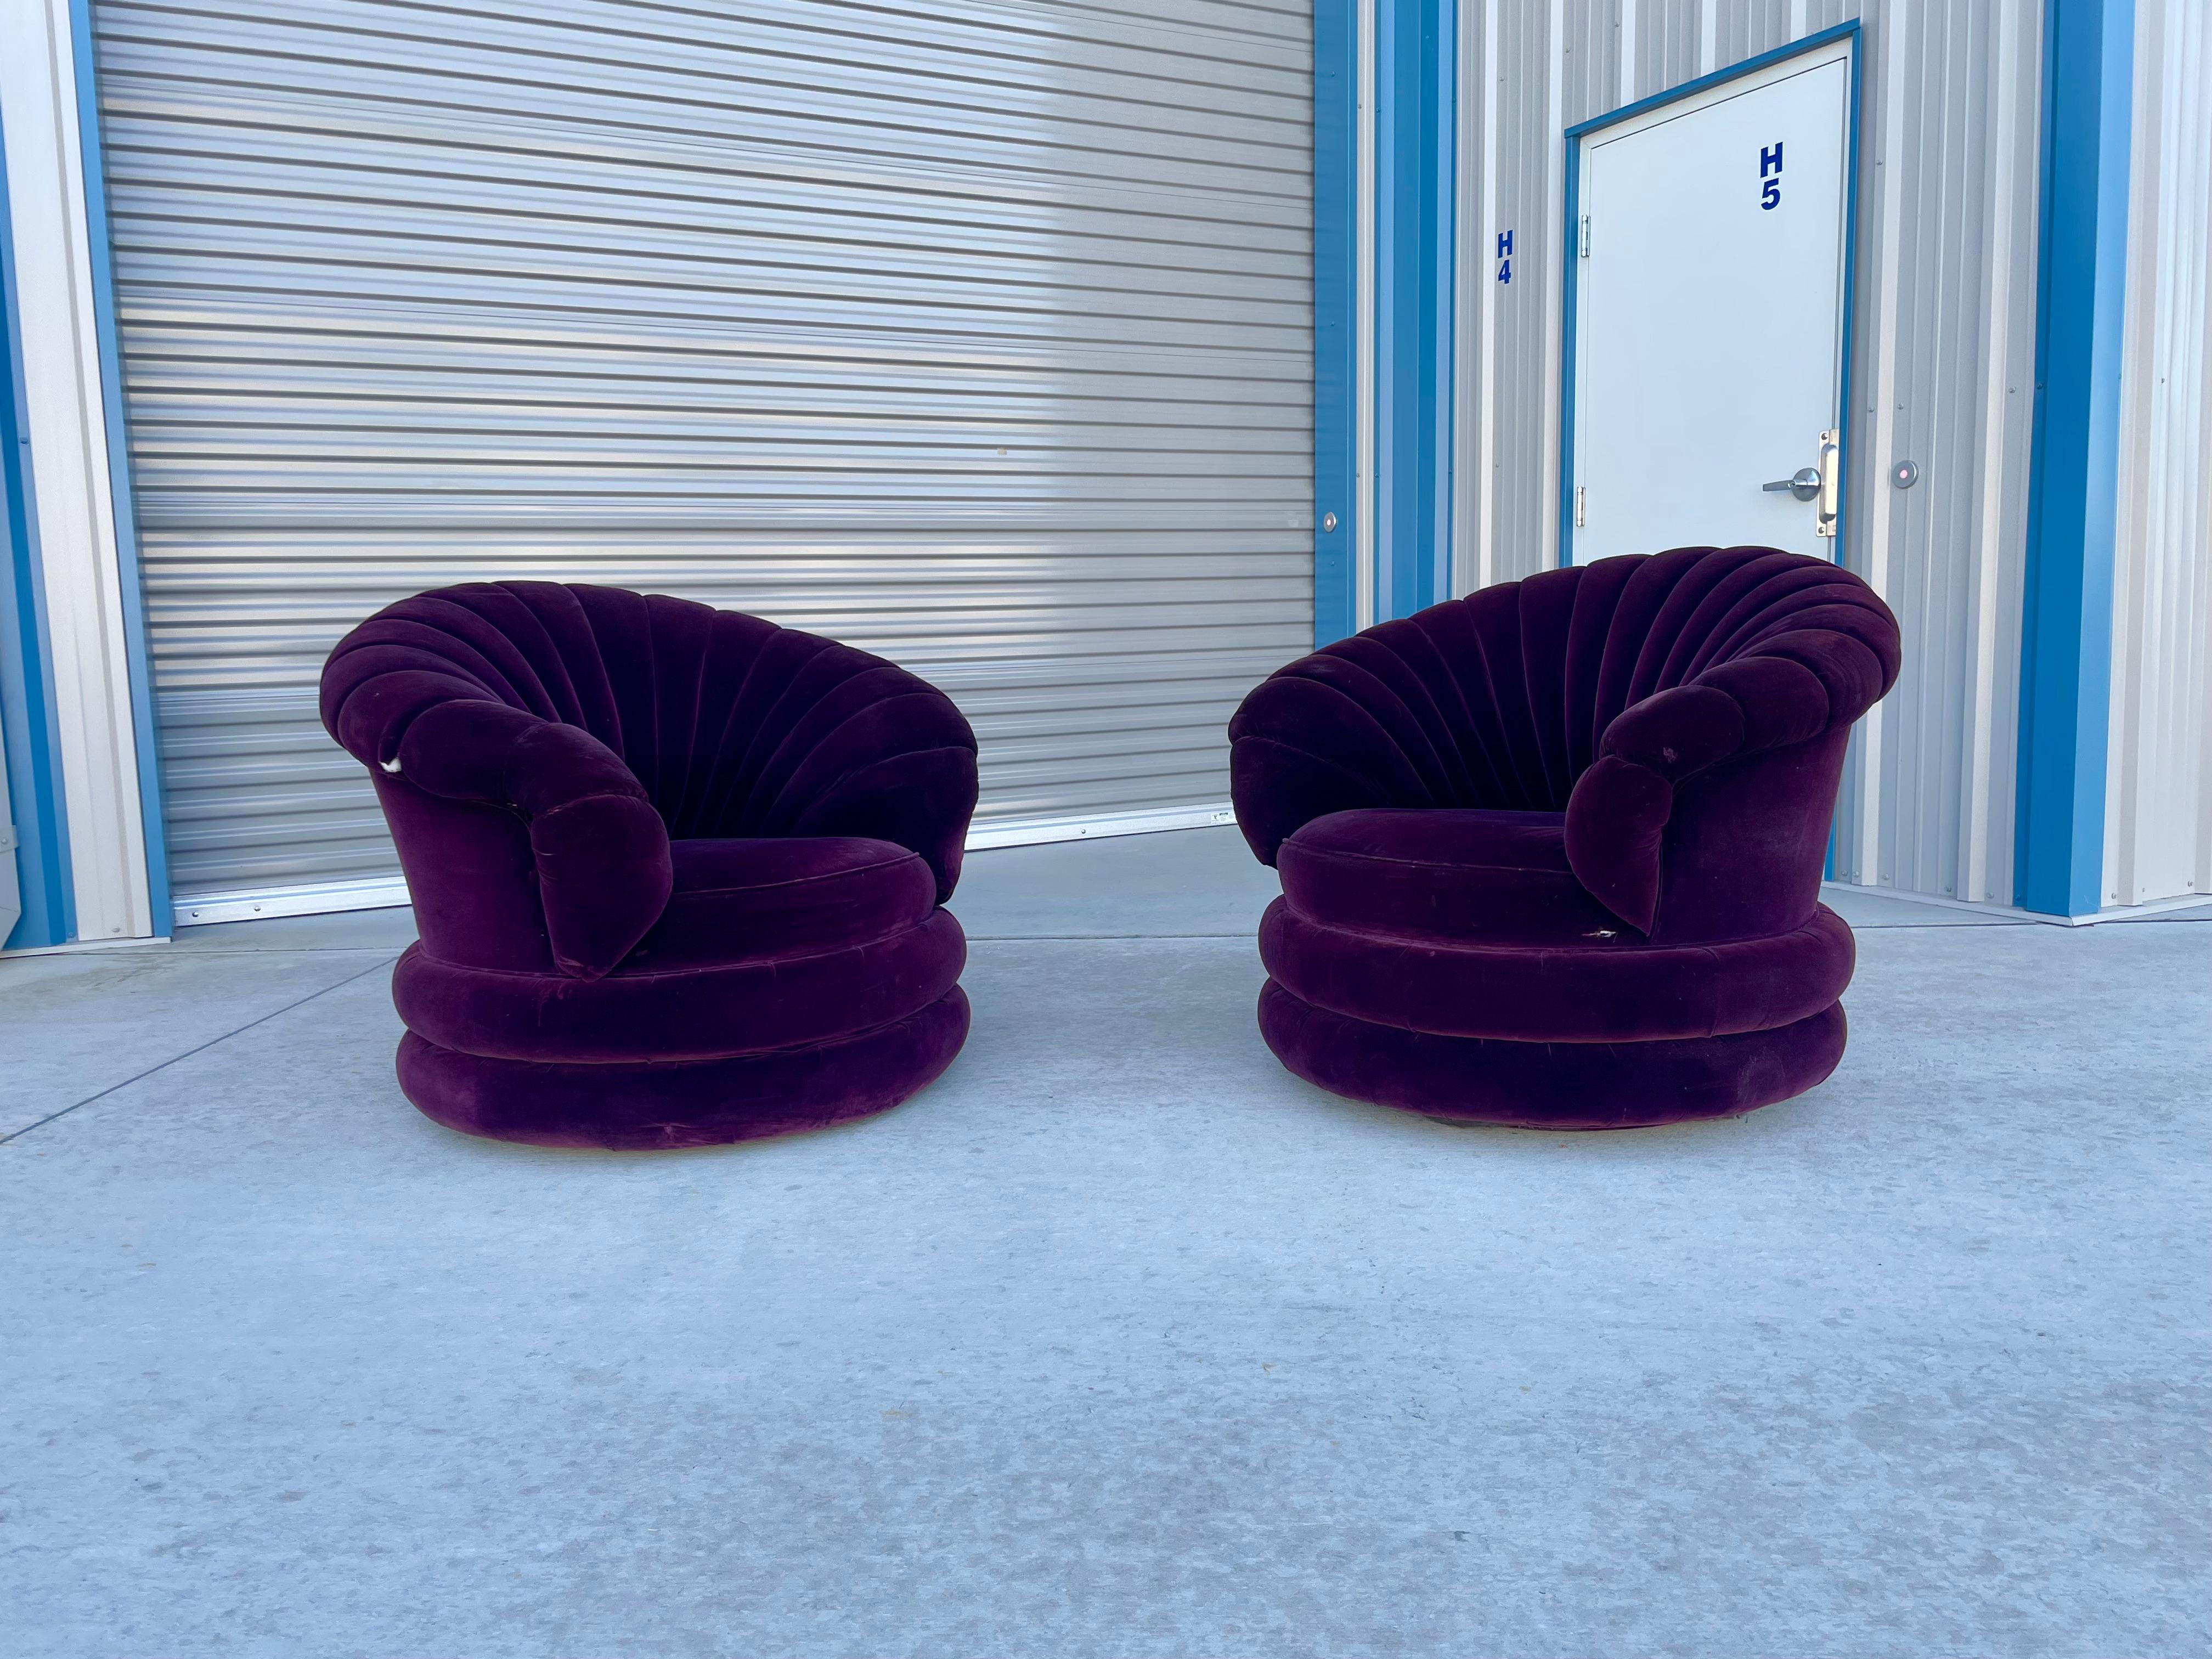 Beautiful vintage clamshell swivel chairs designed and manufactured in the United States circa 1960s. These beautiful chairs feature a swivel base that rotates 360 degrees. The chairs also feature purple suede upholstery with a unique clamshell